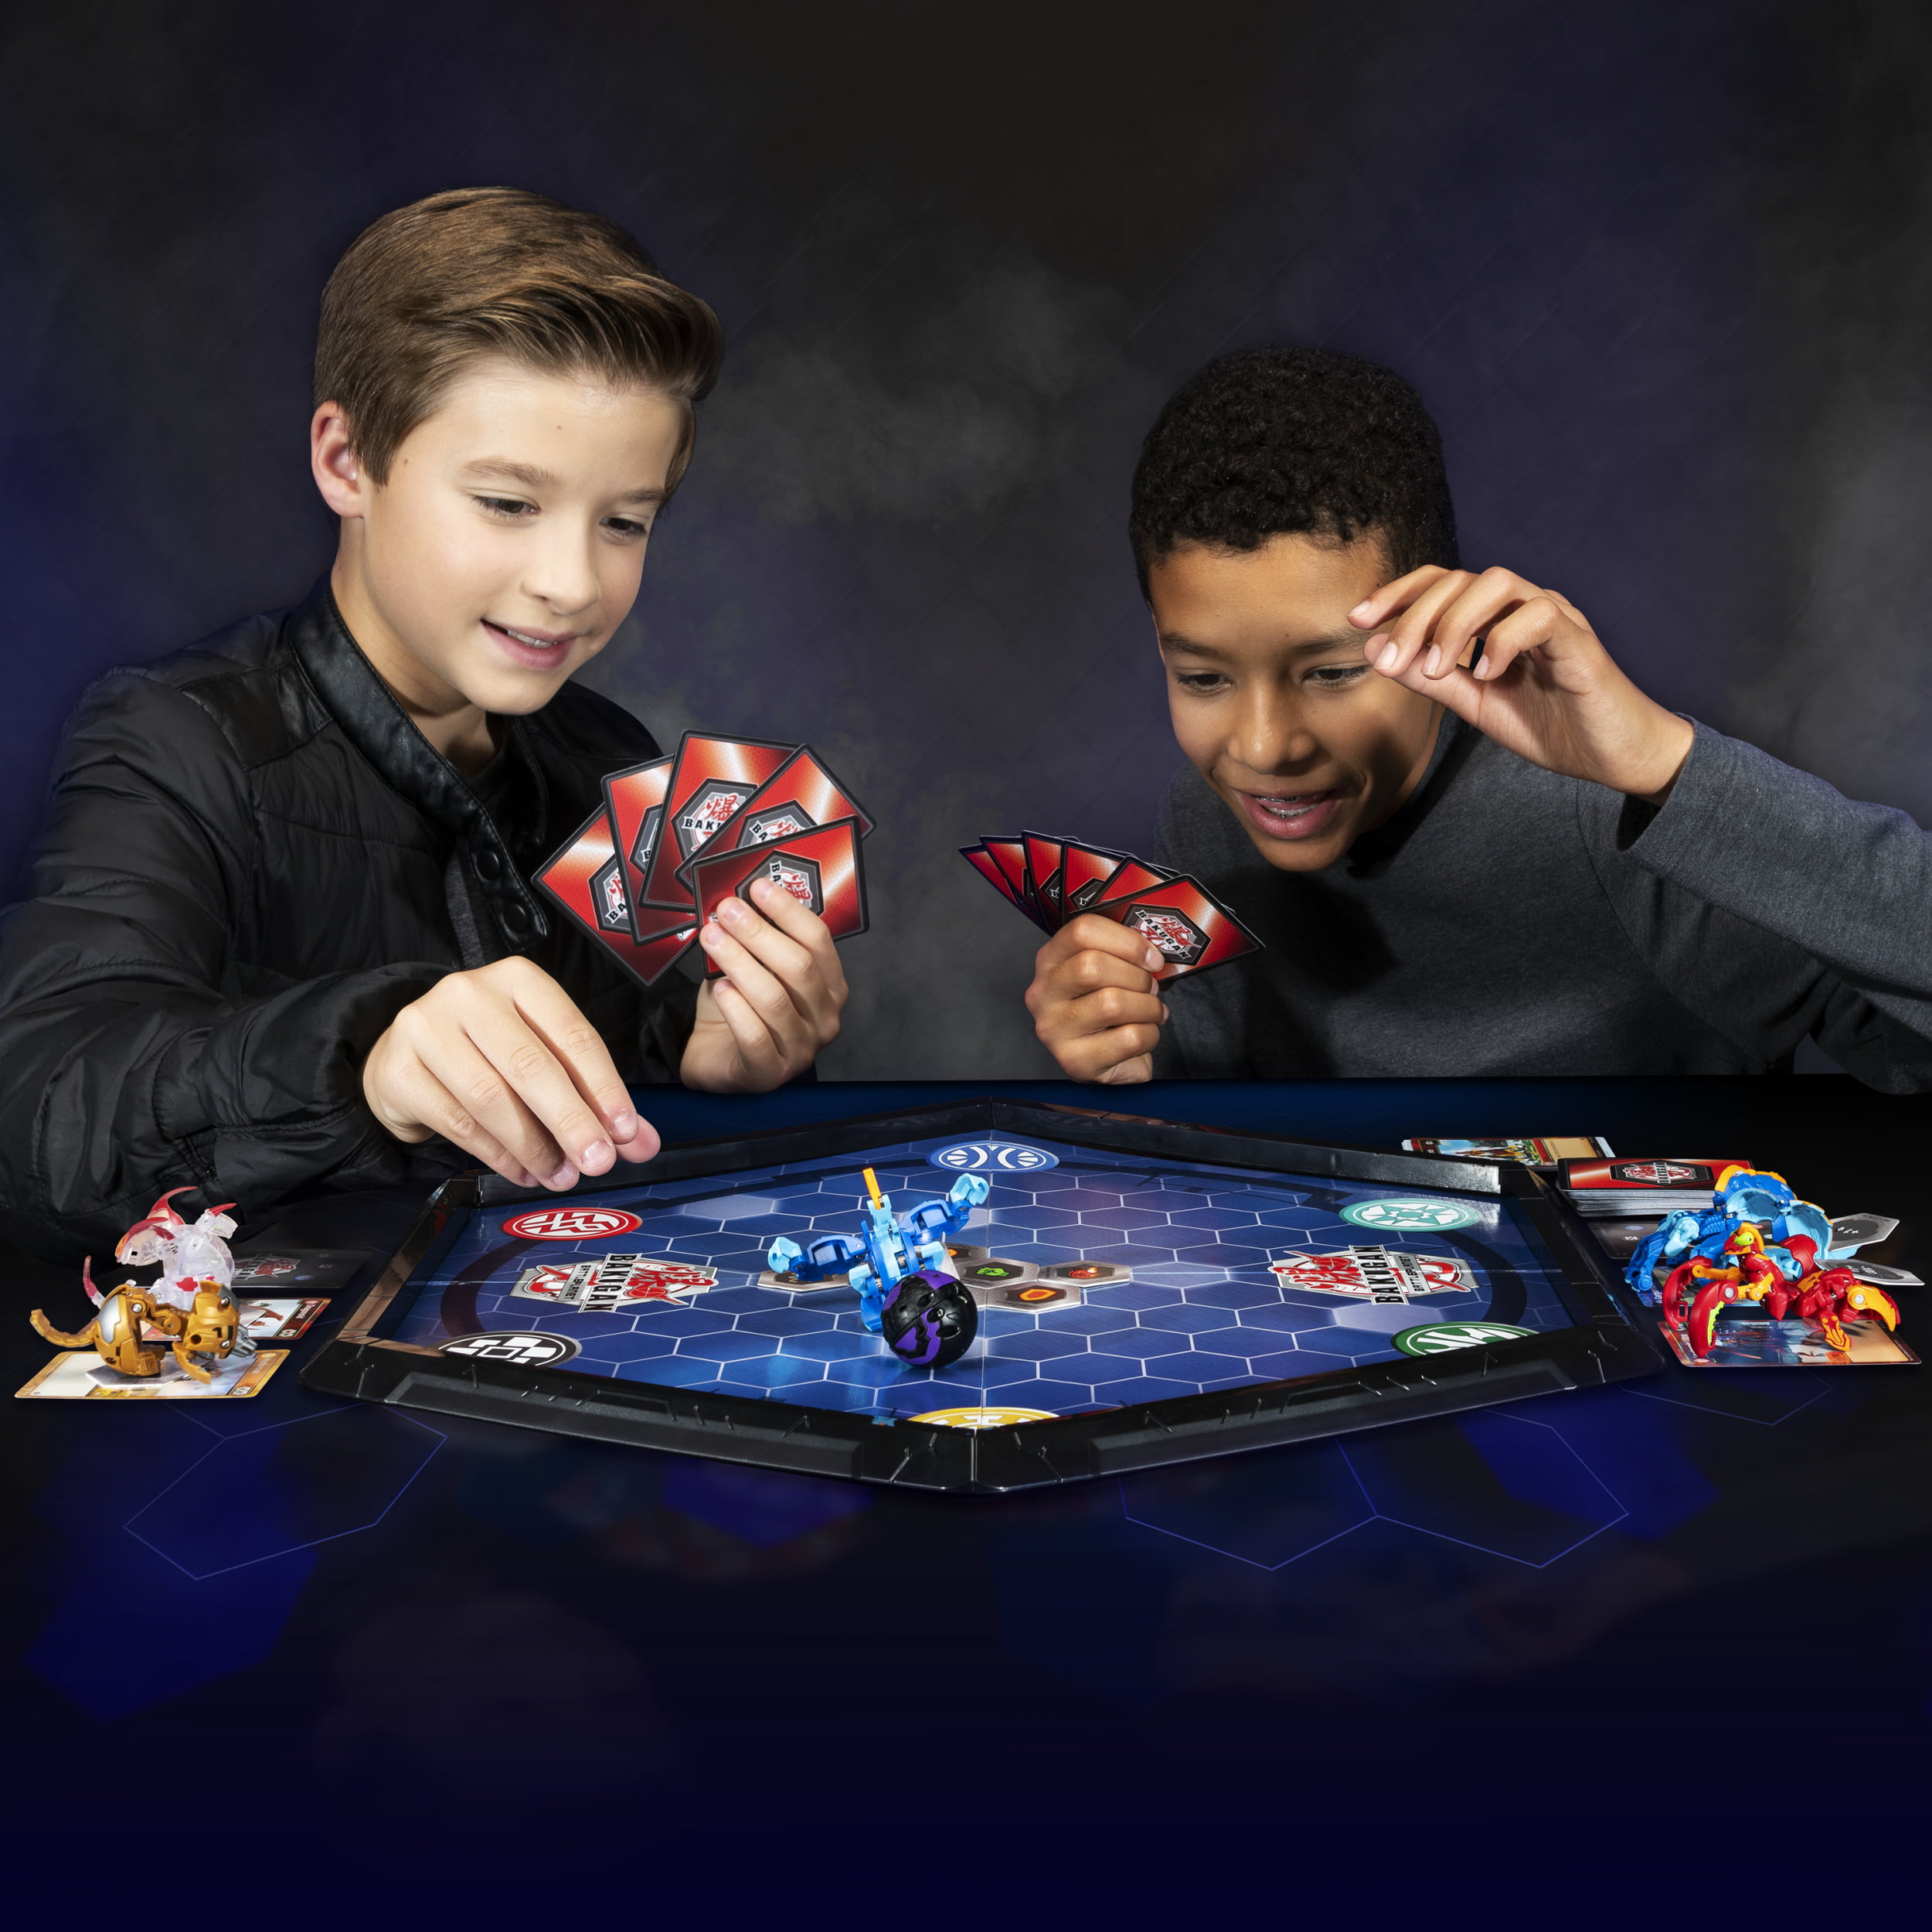 Bakugan Ultra, Hydorous, 3-inch Collectible Action Figure and Trading Card, for Ages 6 and up - image 5 of 5